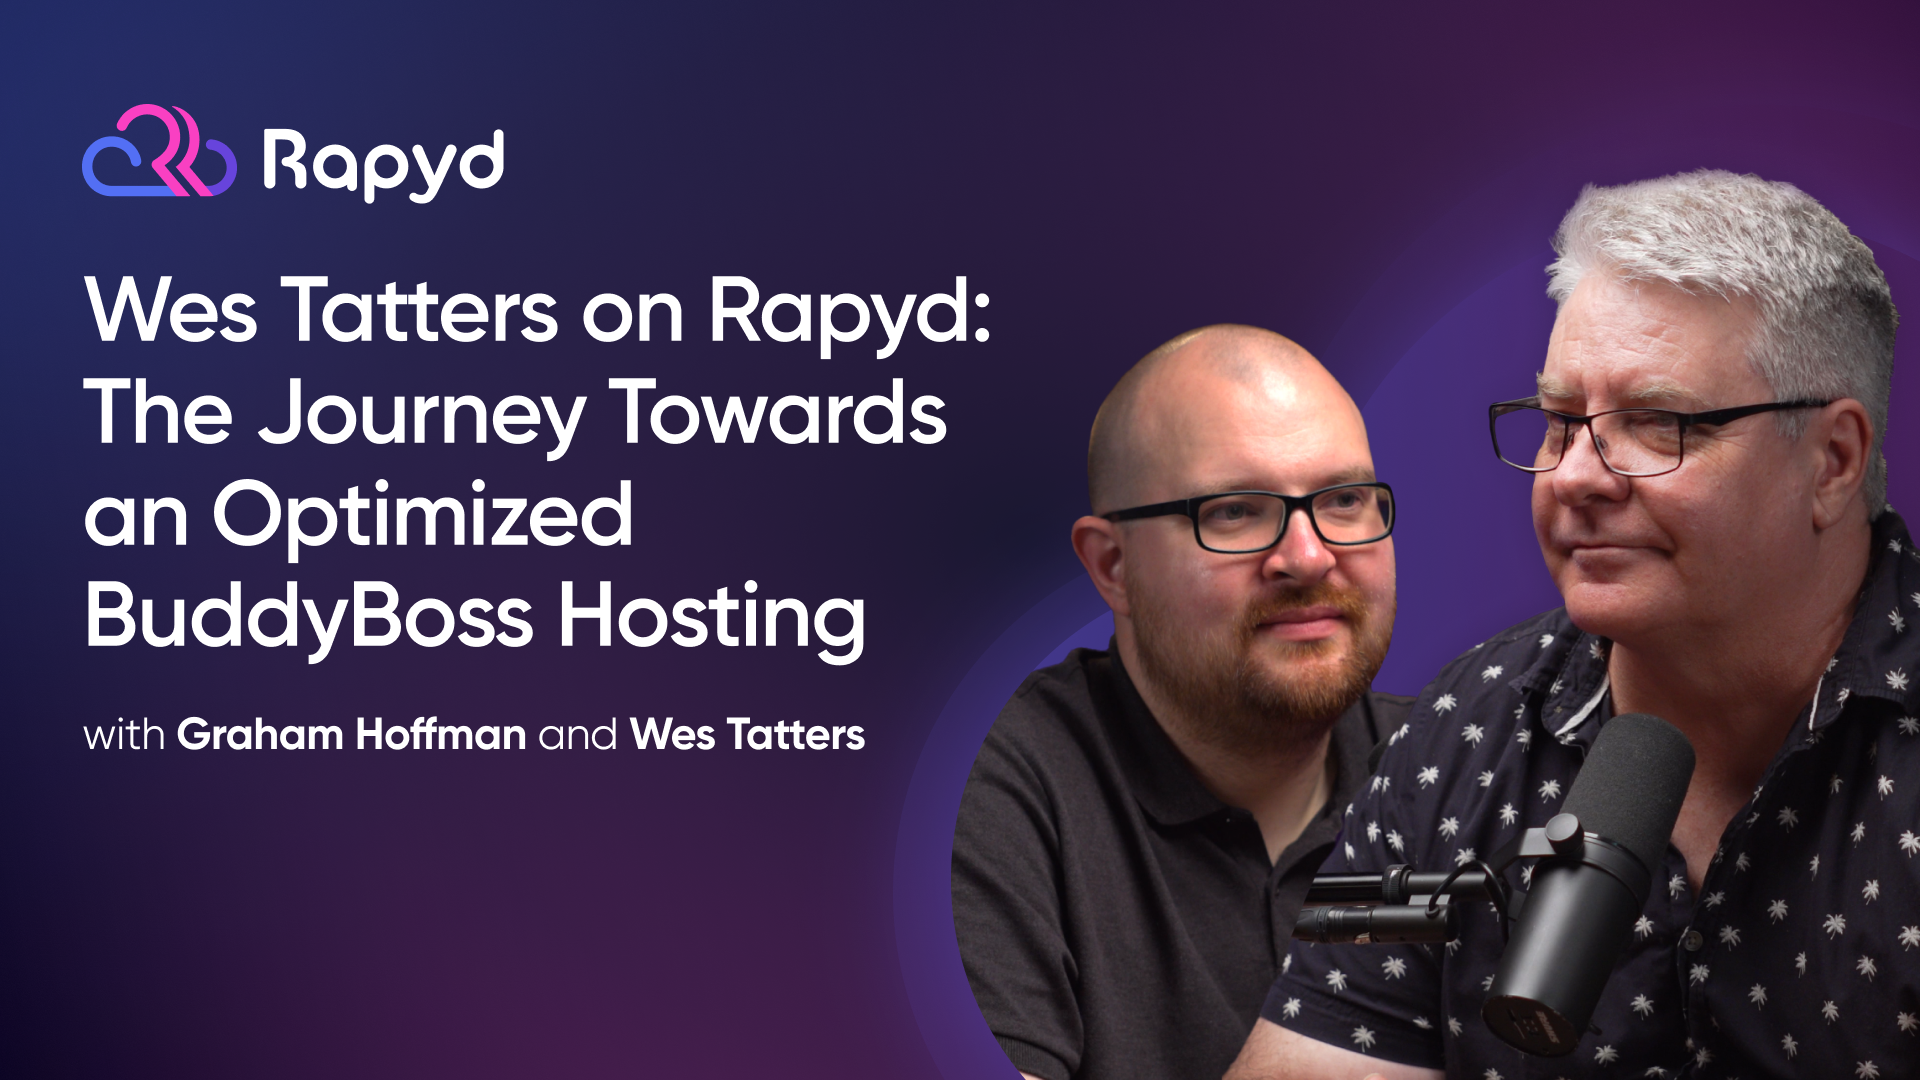 Wes Tatters on Rapyd: The Journey Towards an Optimized BuddyBoss Hosting